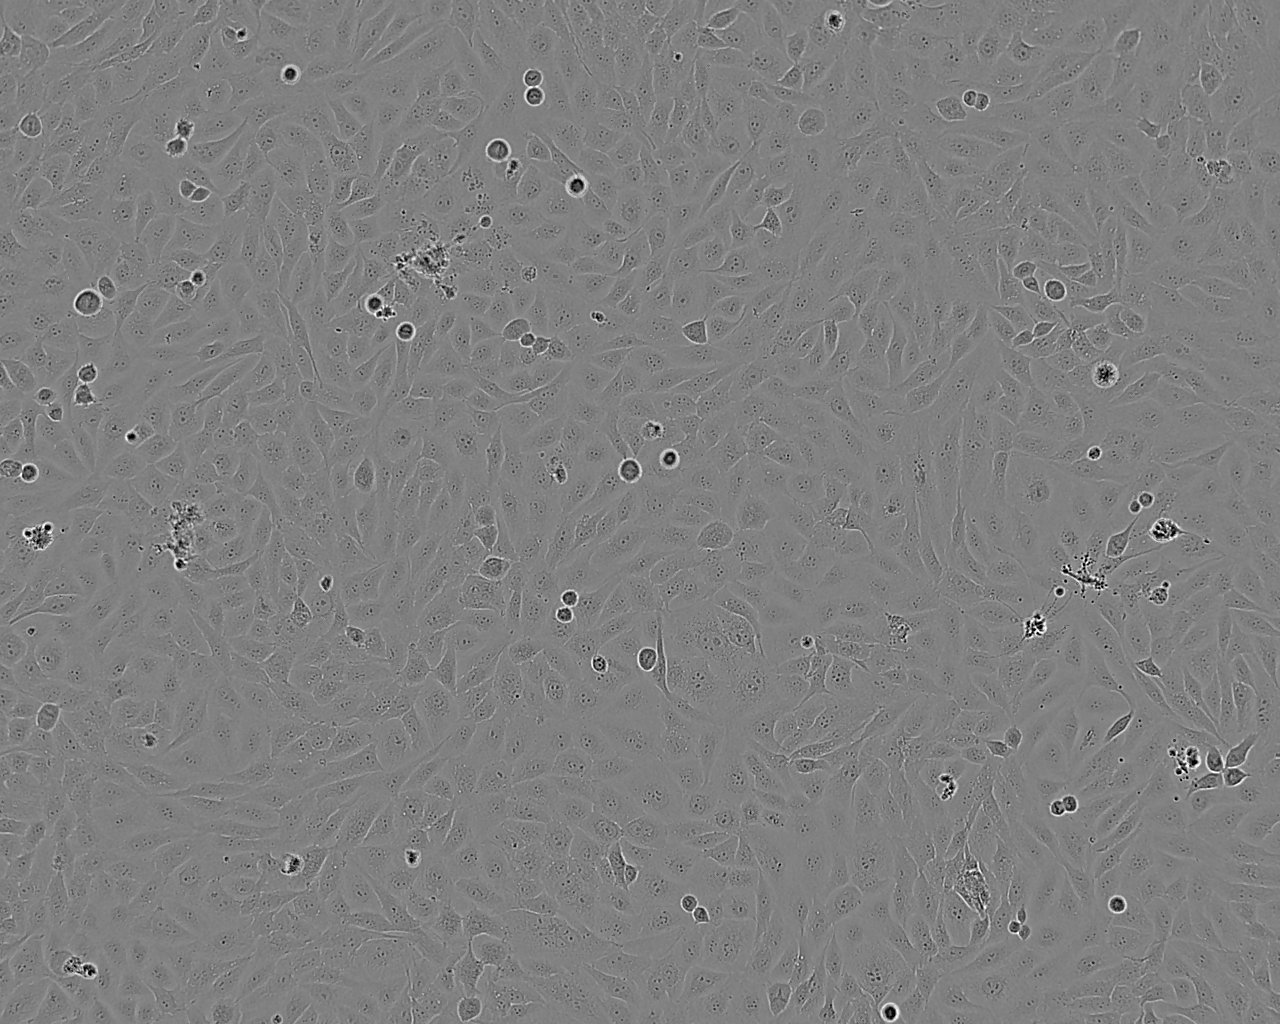 FHs 74 Int epithelioid cells人小肠正常细胞系,FHs 74 Int epithelioid cells